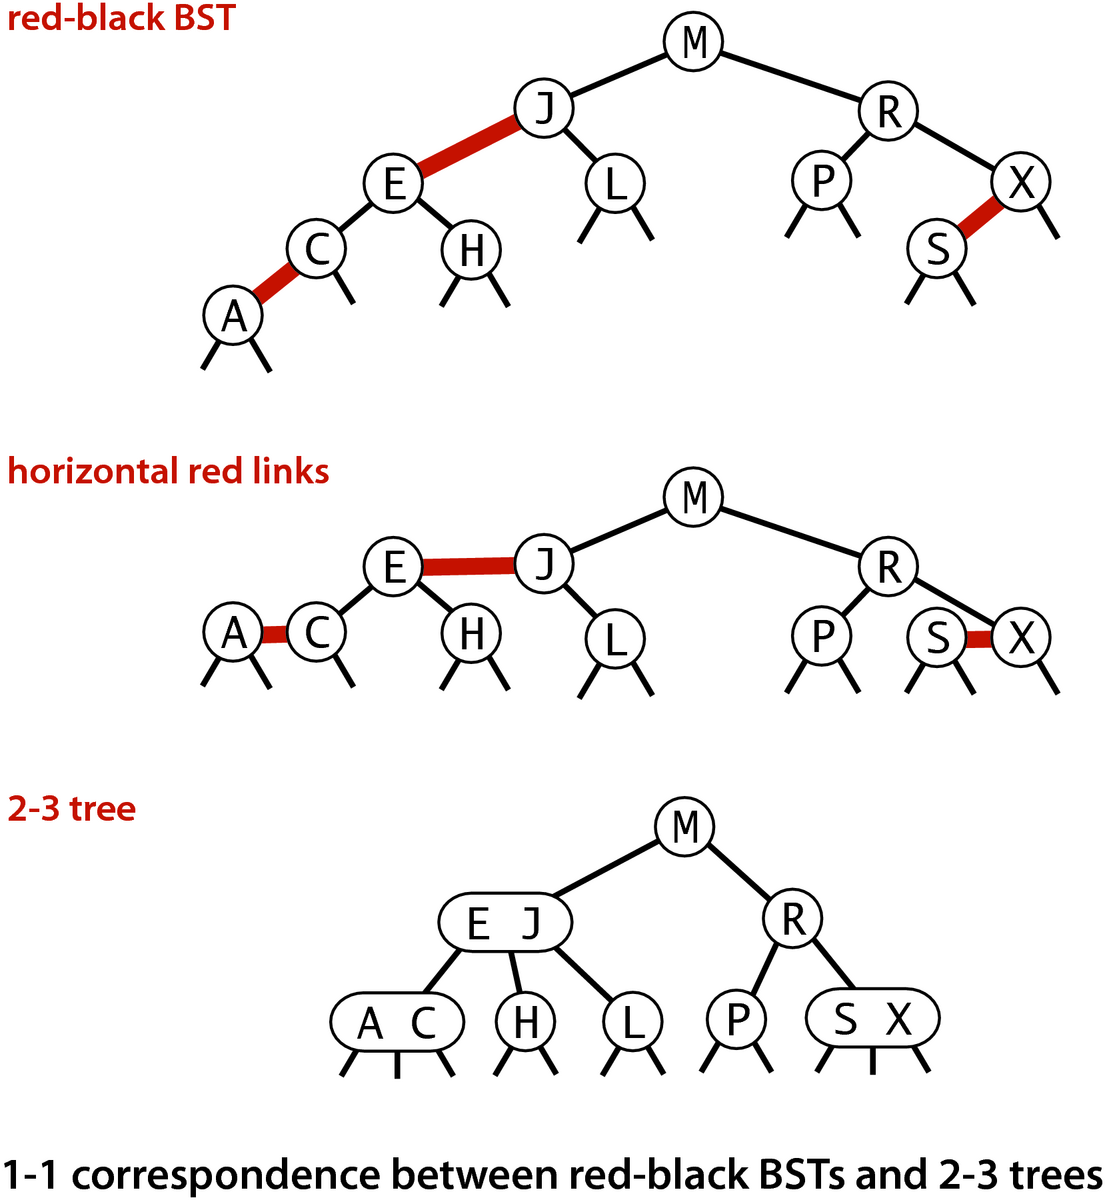 [1-1 correspondence between red-black BSTs and 2-3 trees (p.433)]